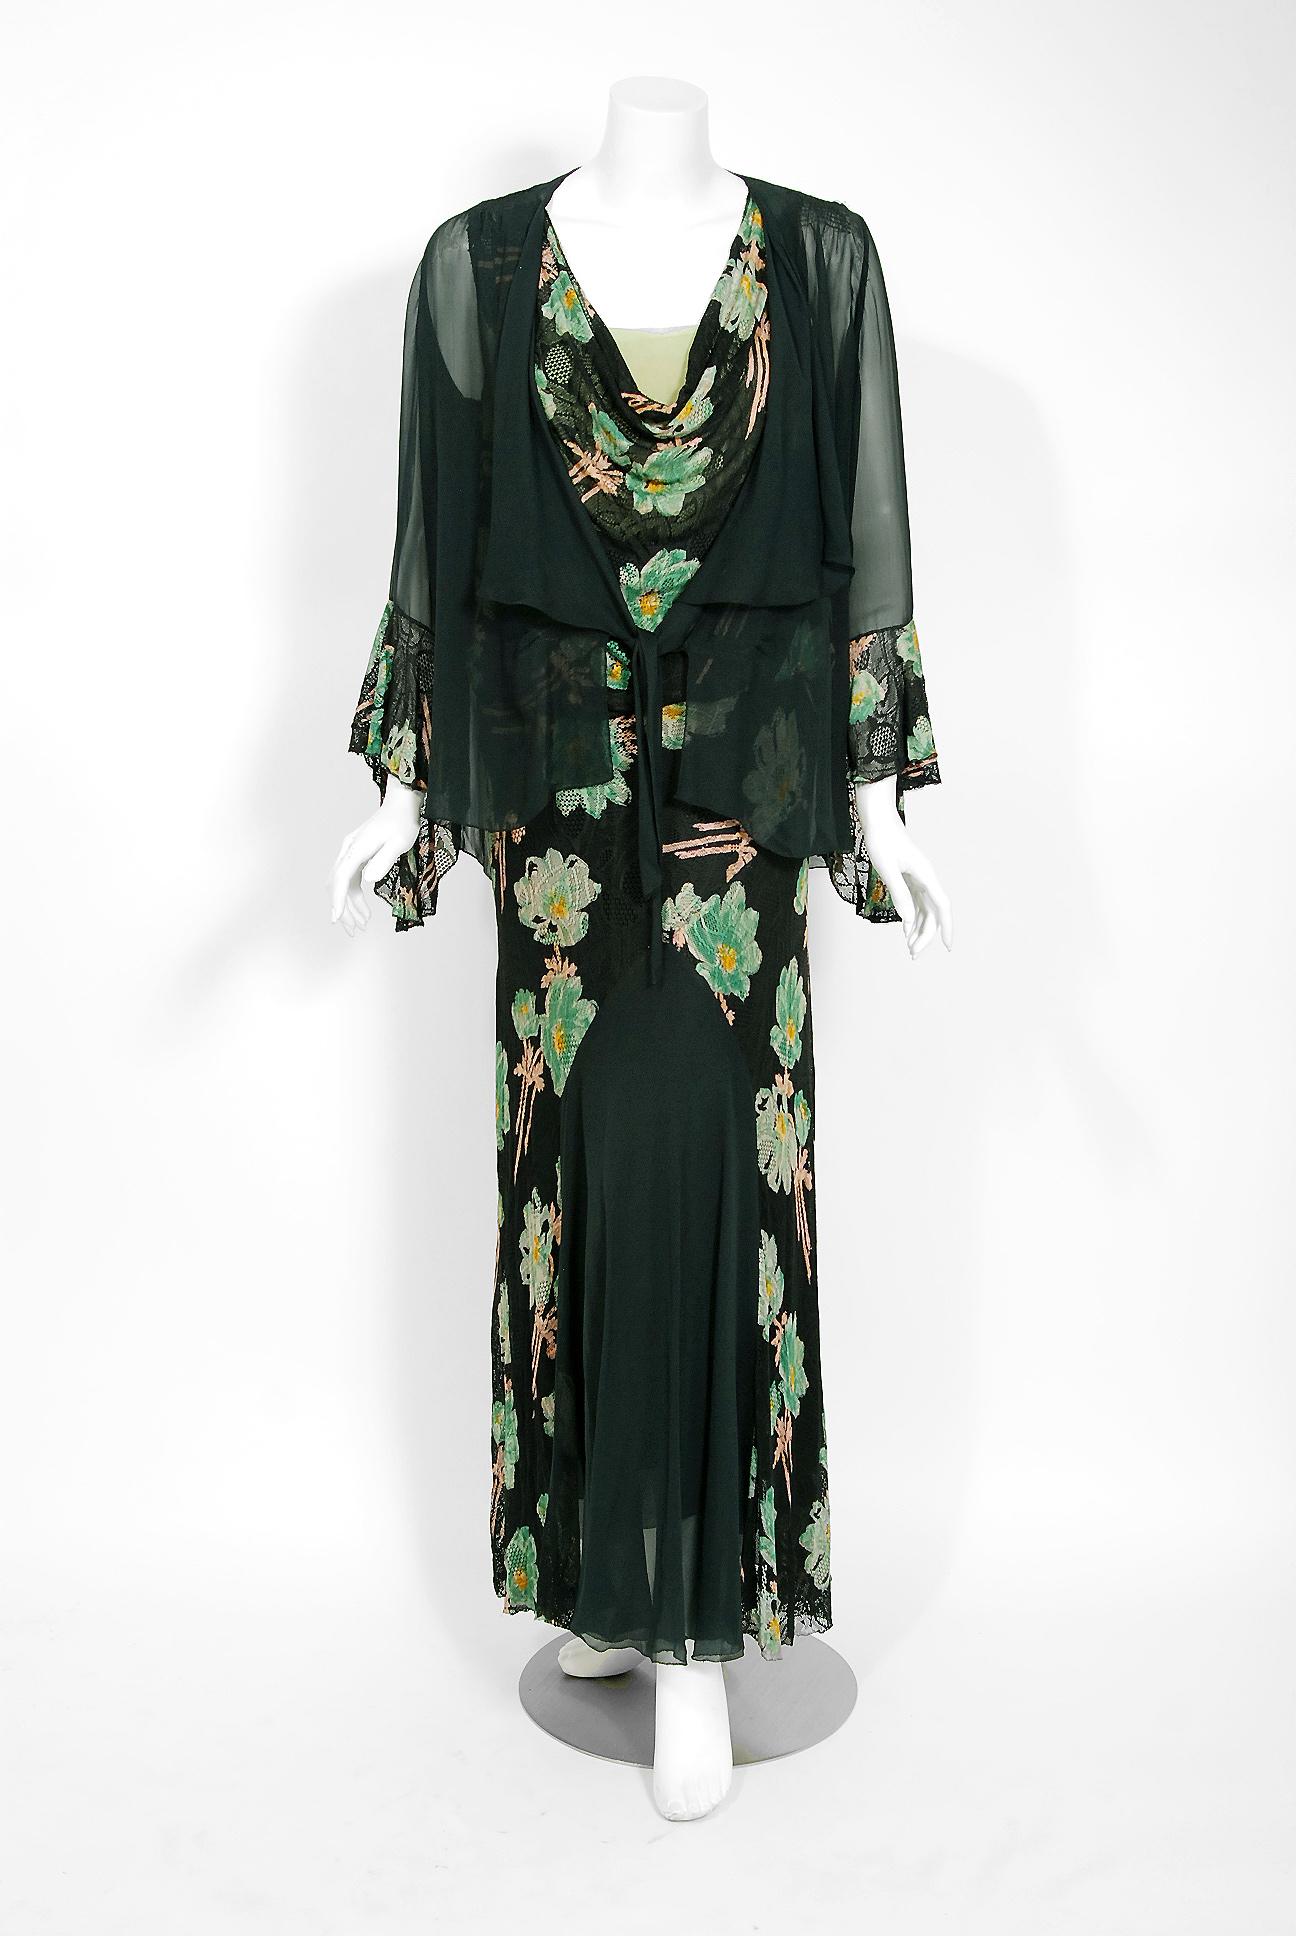 The breathtaking large-scale green black floral garden deco print used on this 1930's lace and silk-chiffon gown ensemble has a timeless allure that I find irresistible. The bodice is a low plunge cowl-neck sleeveless. The elegant blousy waist falls